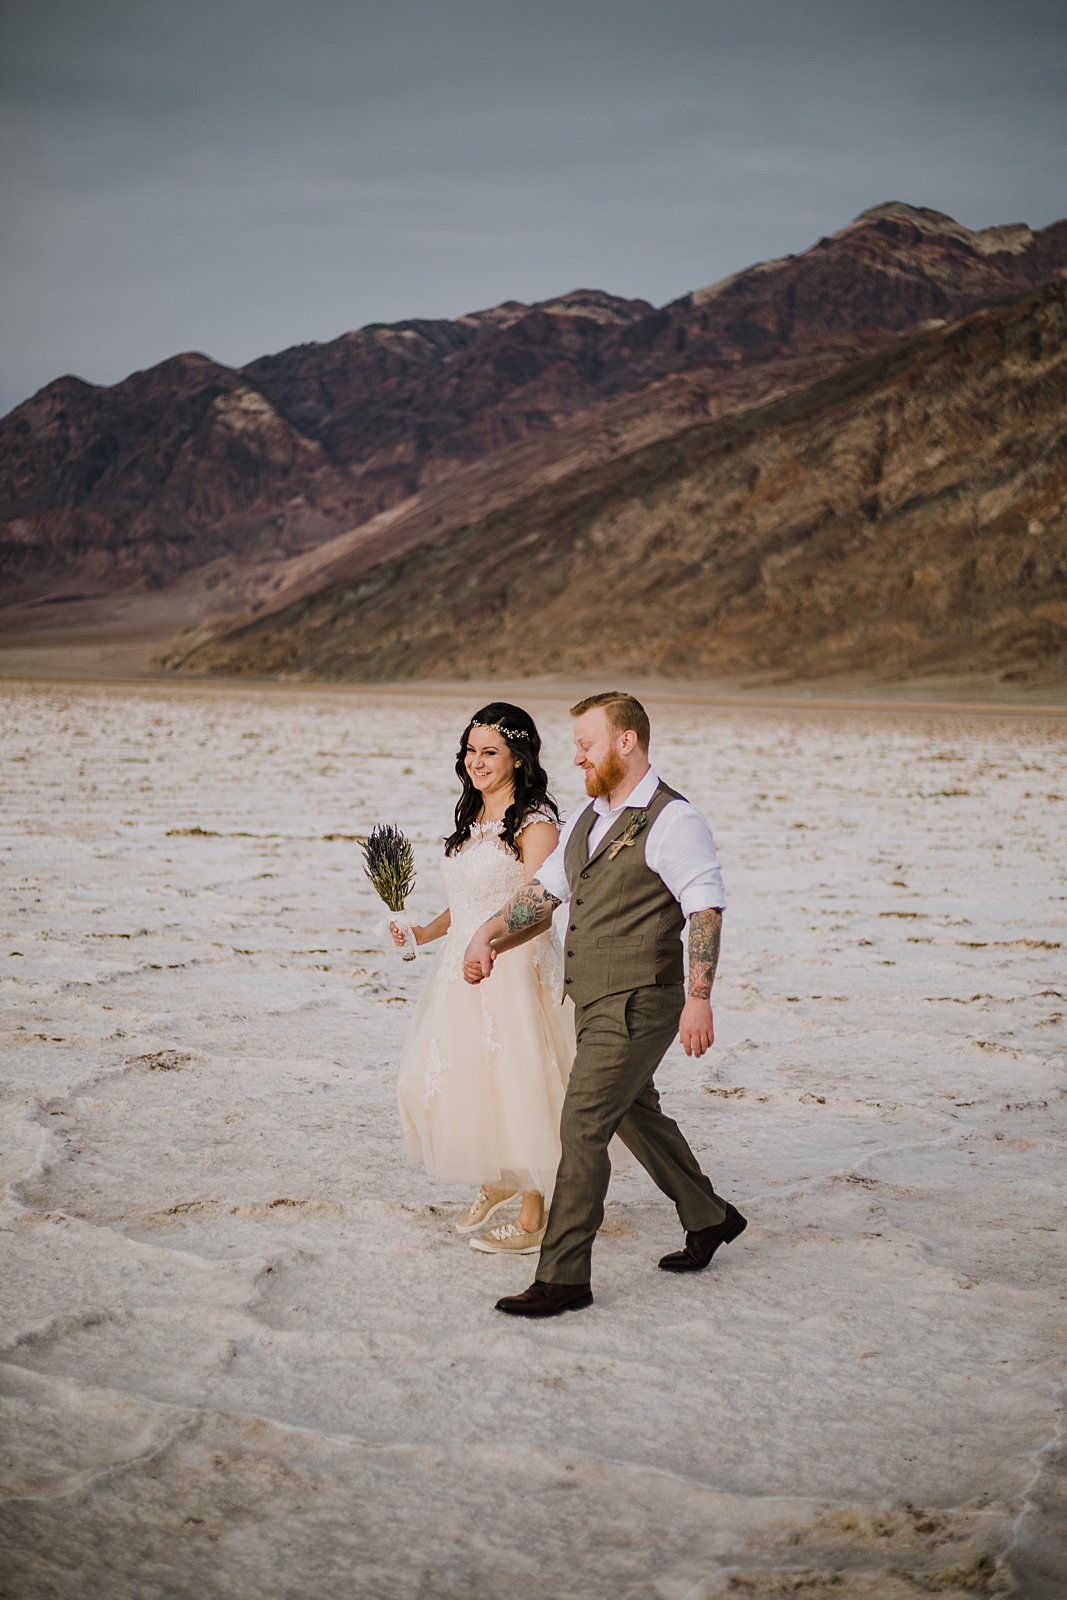 walking on the salt flats, death valley national park elopement, elope in death valley, badwater basin elopement, hiking in death valley national park, sunset at badwater basin